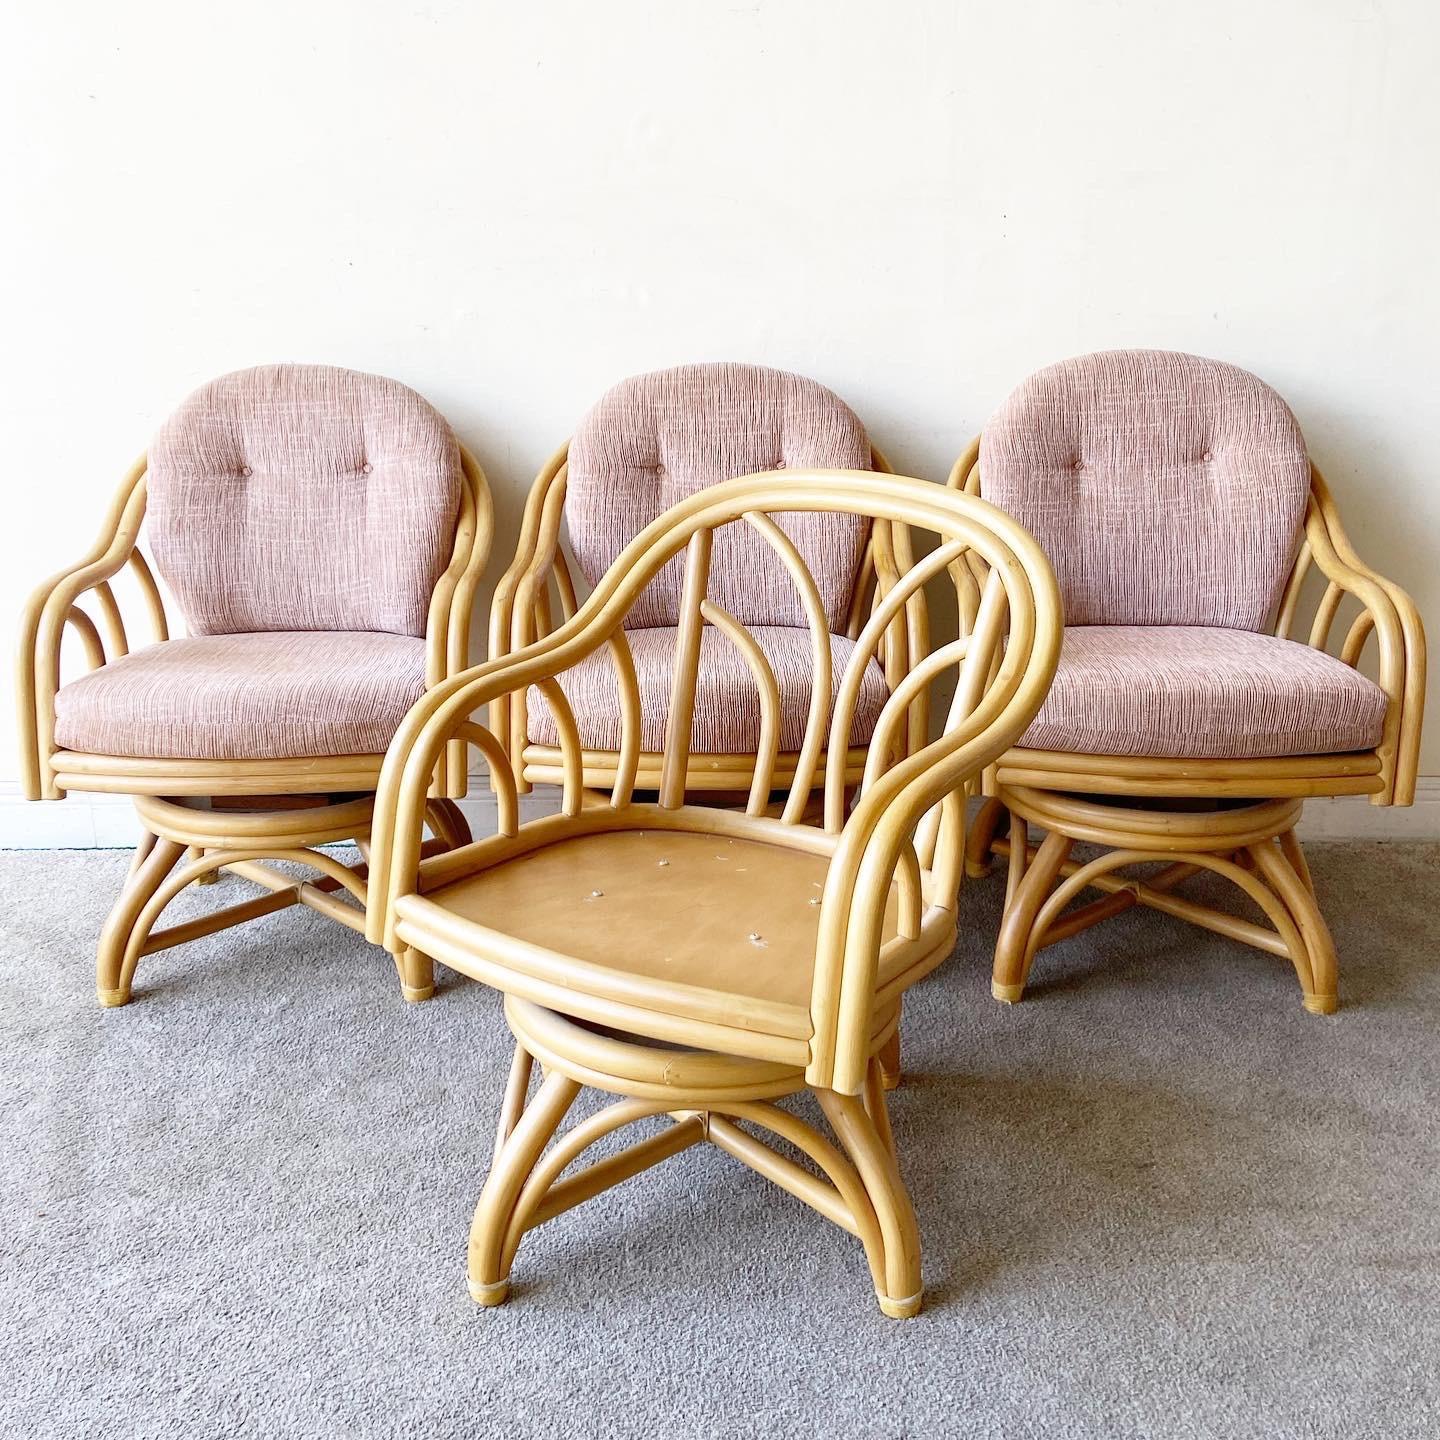 Amazing set of 4 bamboo rattan swivel chairs by Rattan Specialities. Each chair features the original pink seat cushions with tufted backrests.